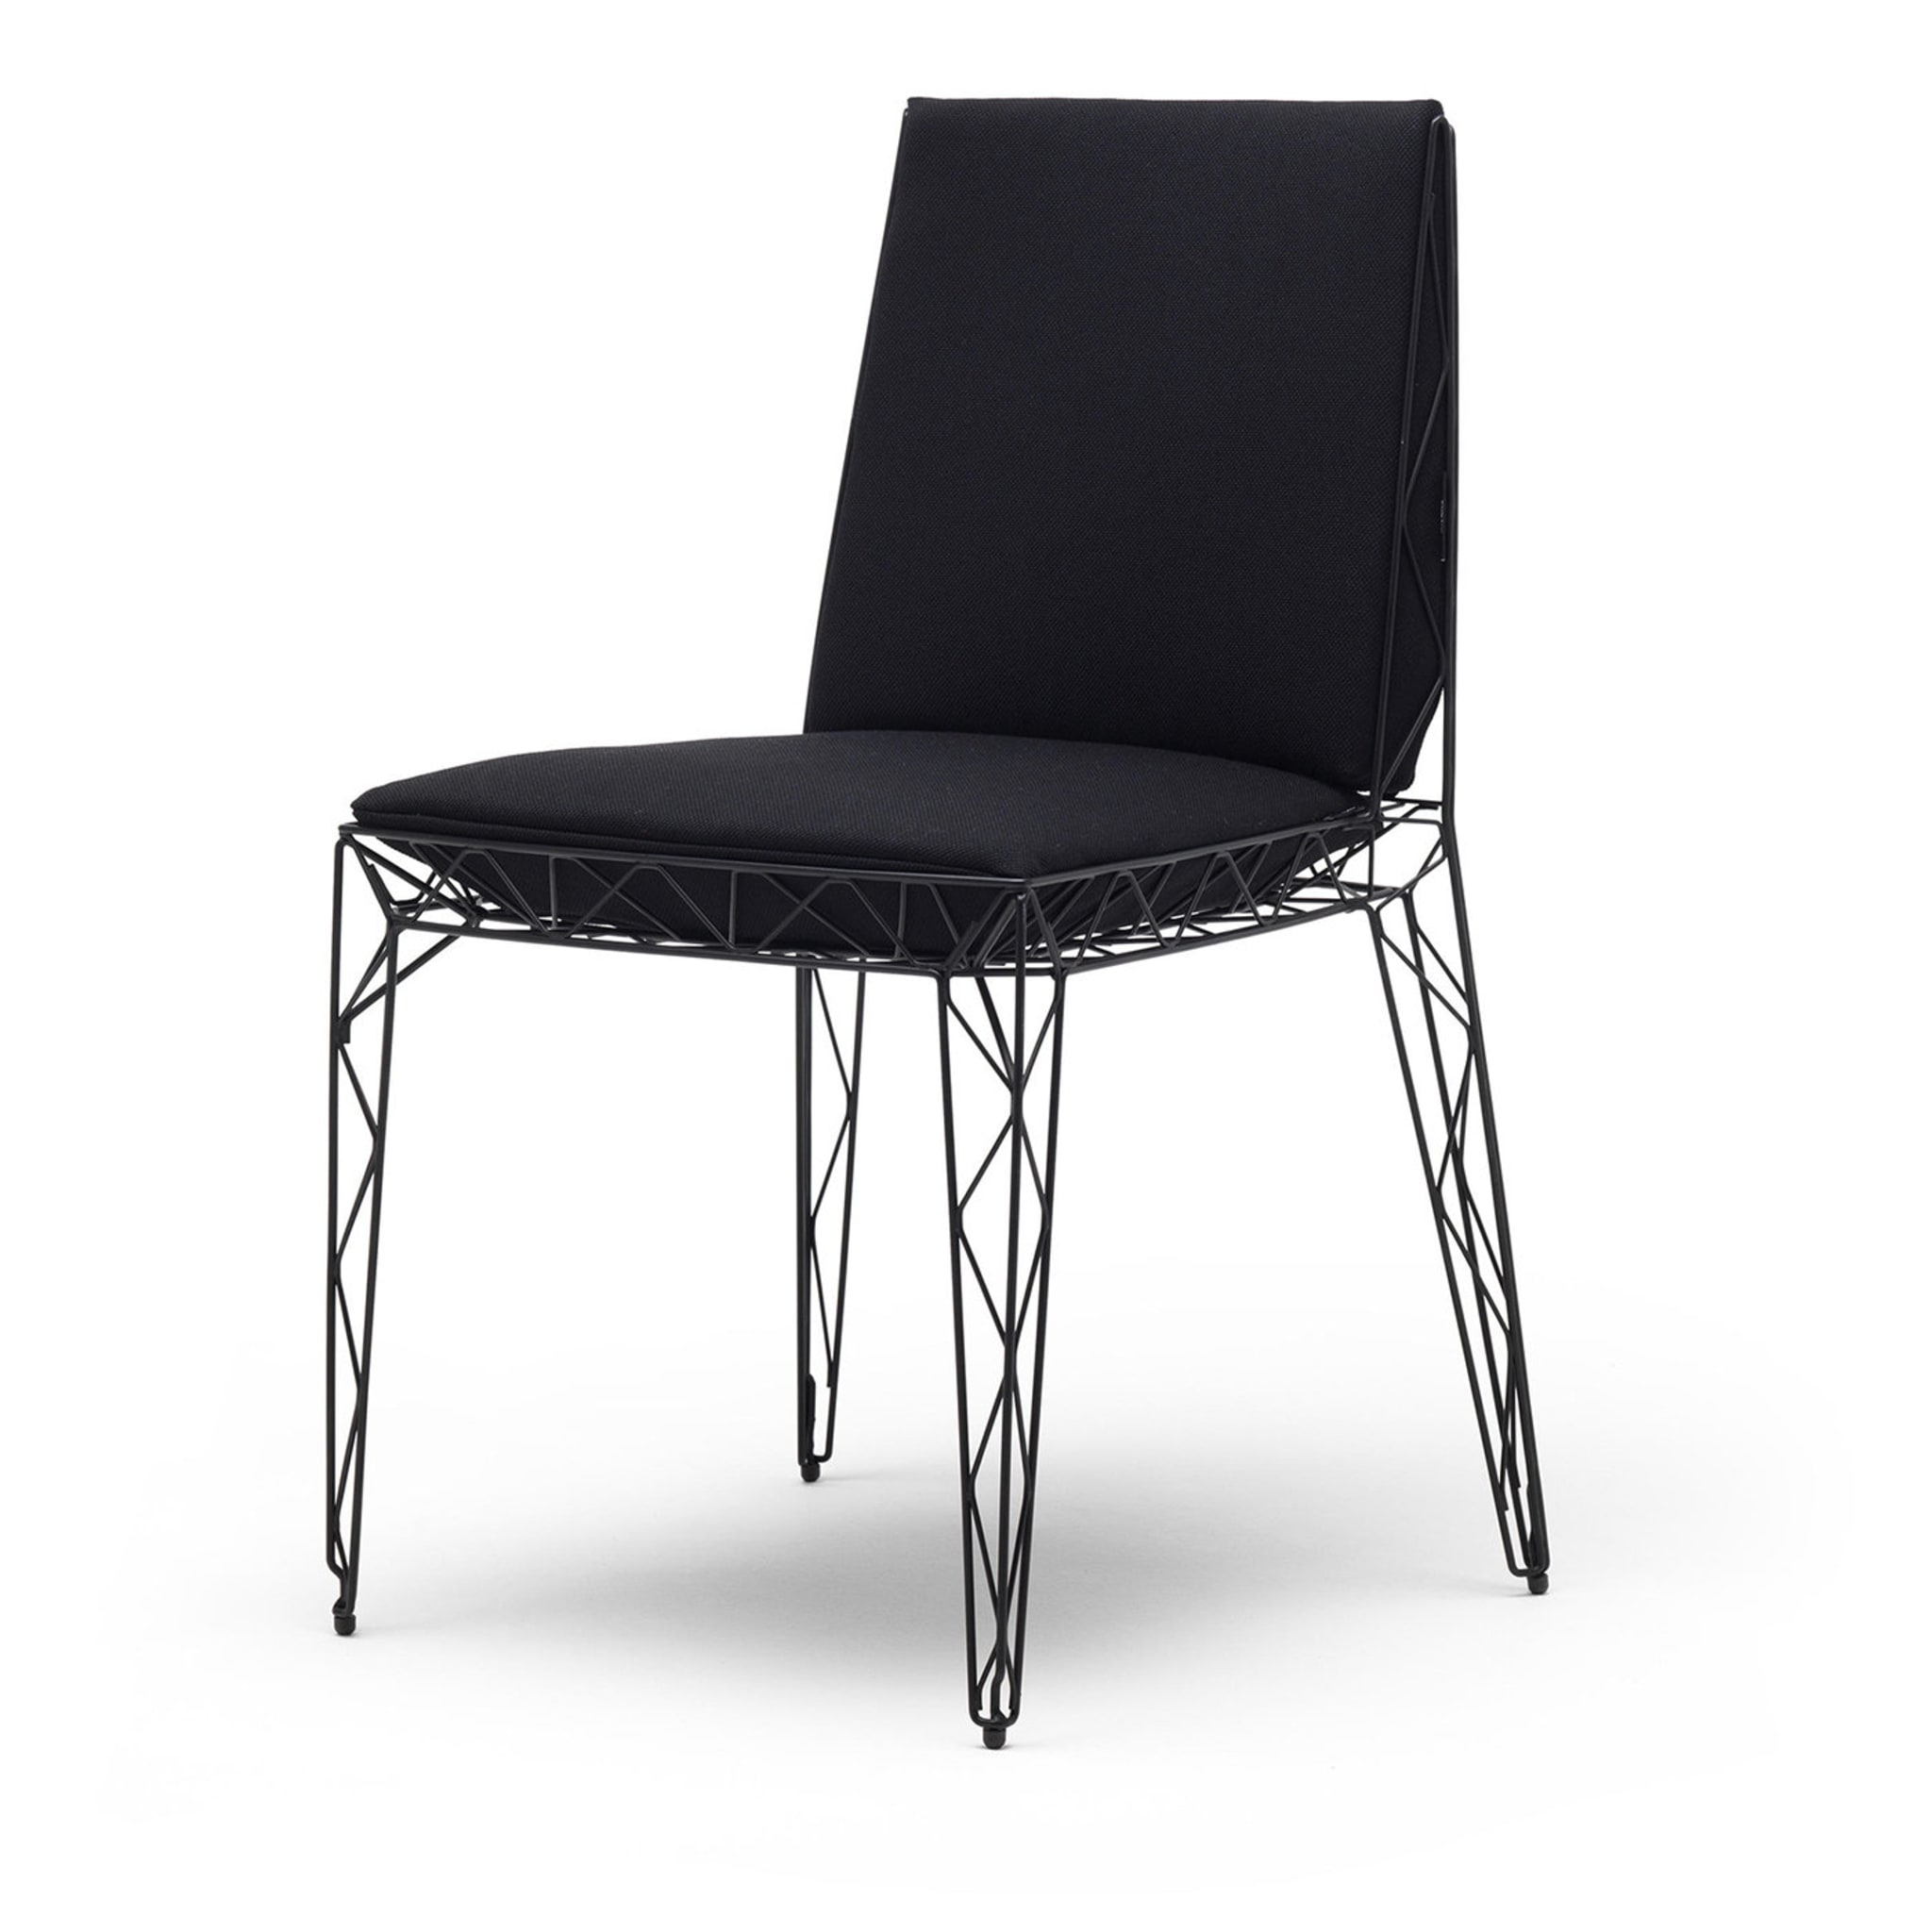 Nua Set of 2 Chairs - Alternative view 1